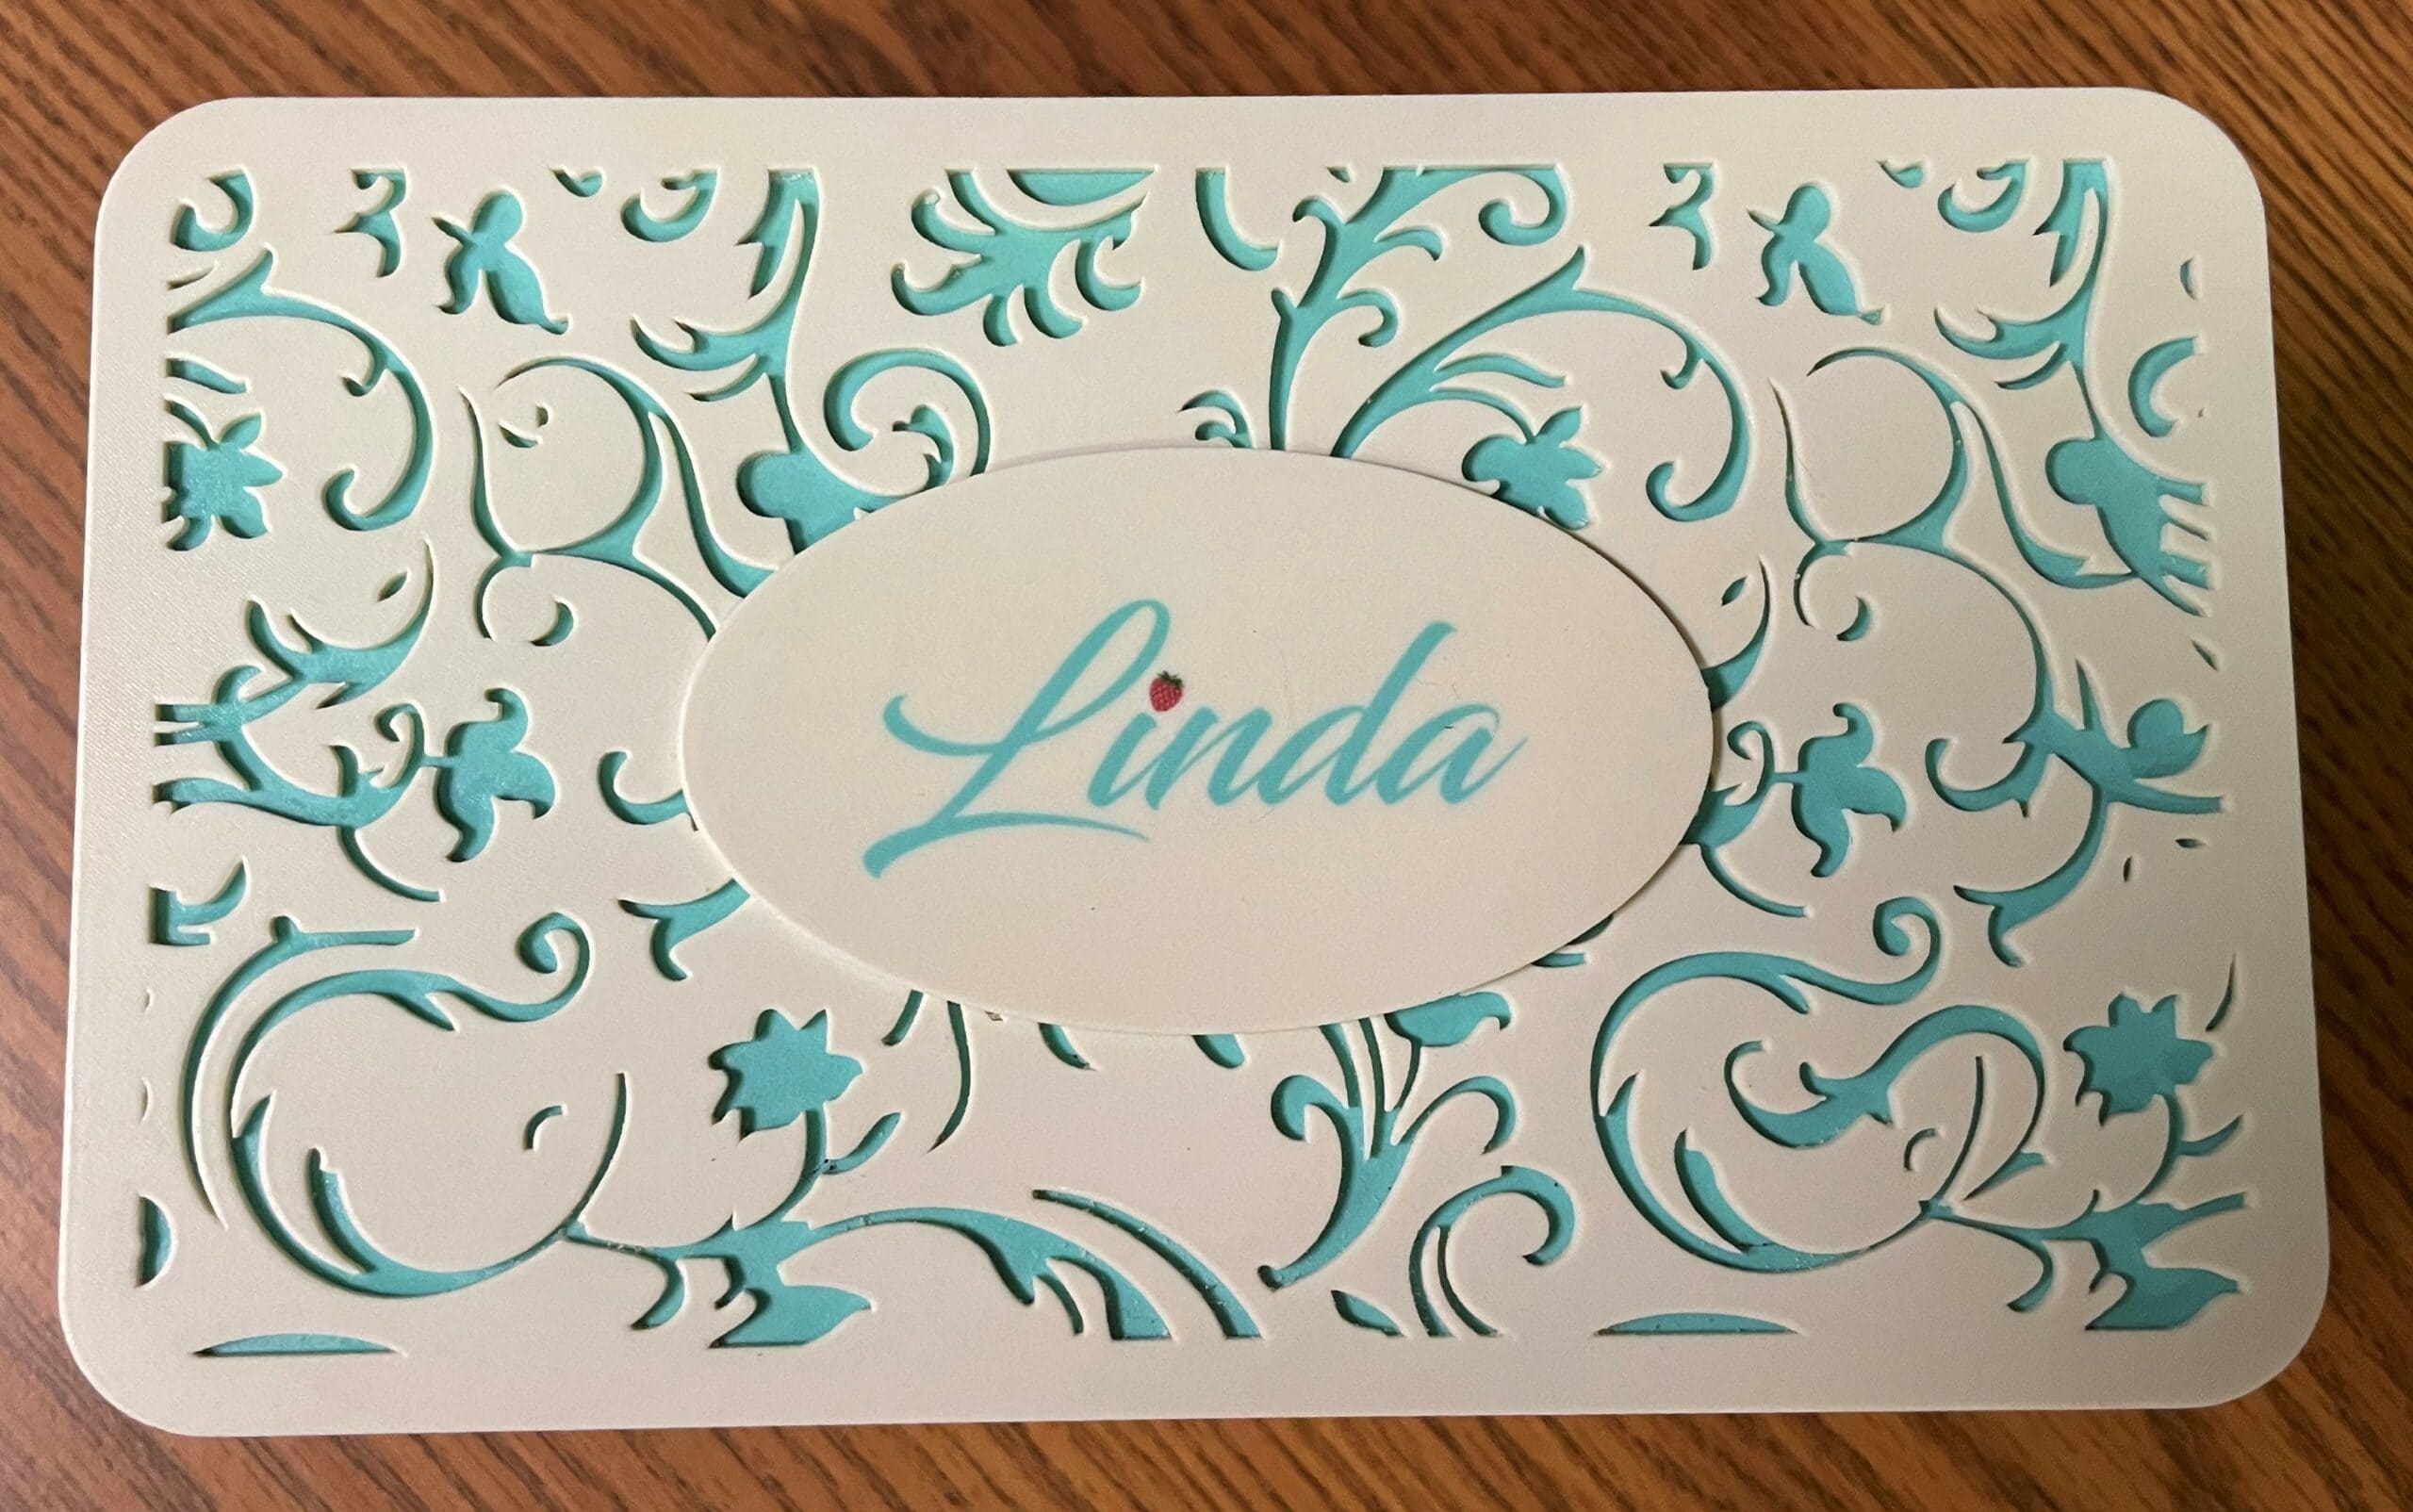 The personalized PolyJet jewelry-box lid features a recessed floral cut-out pattern in ivory, with a background layer of deep aqua, all printed as a single part. Forming the dot of the 